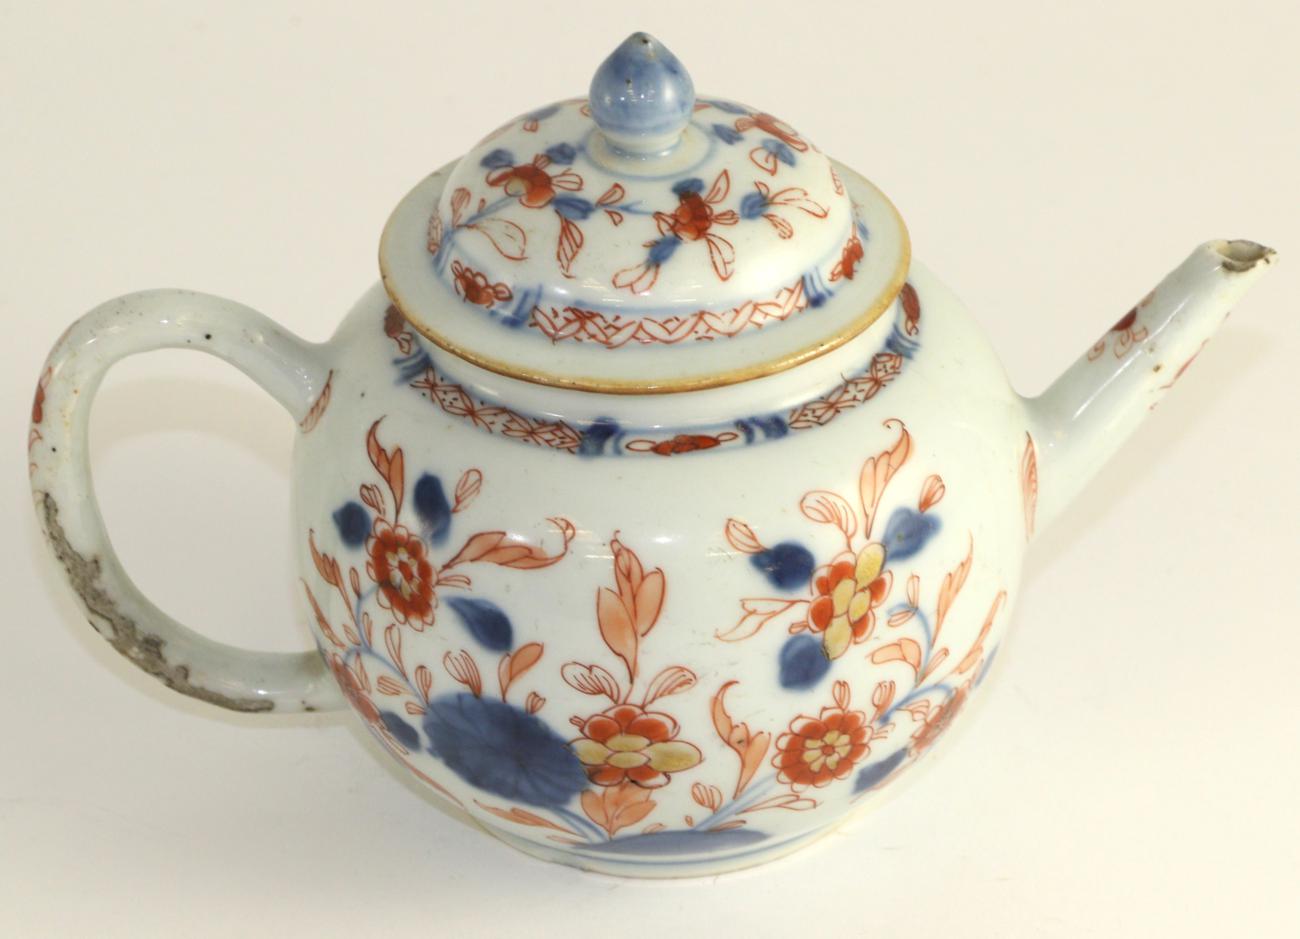 Lot 178 - A Chinese Imari teapot and cover, 18th century, globular form painted with foliage, 13cm high